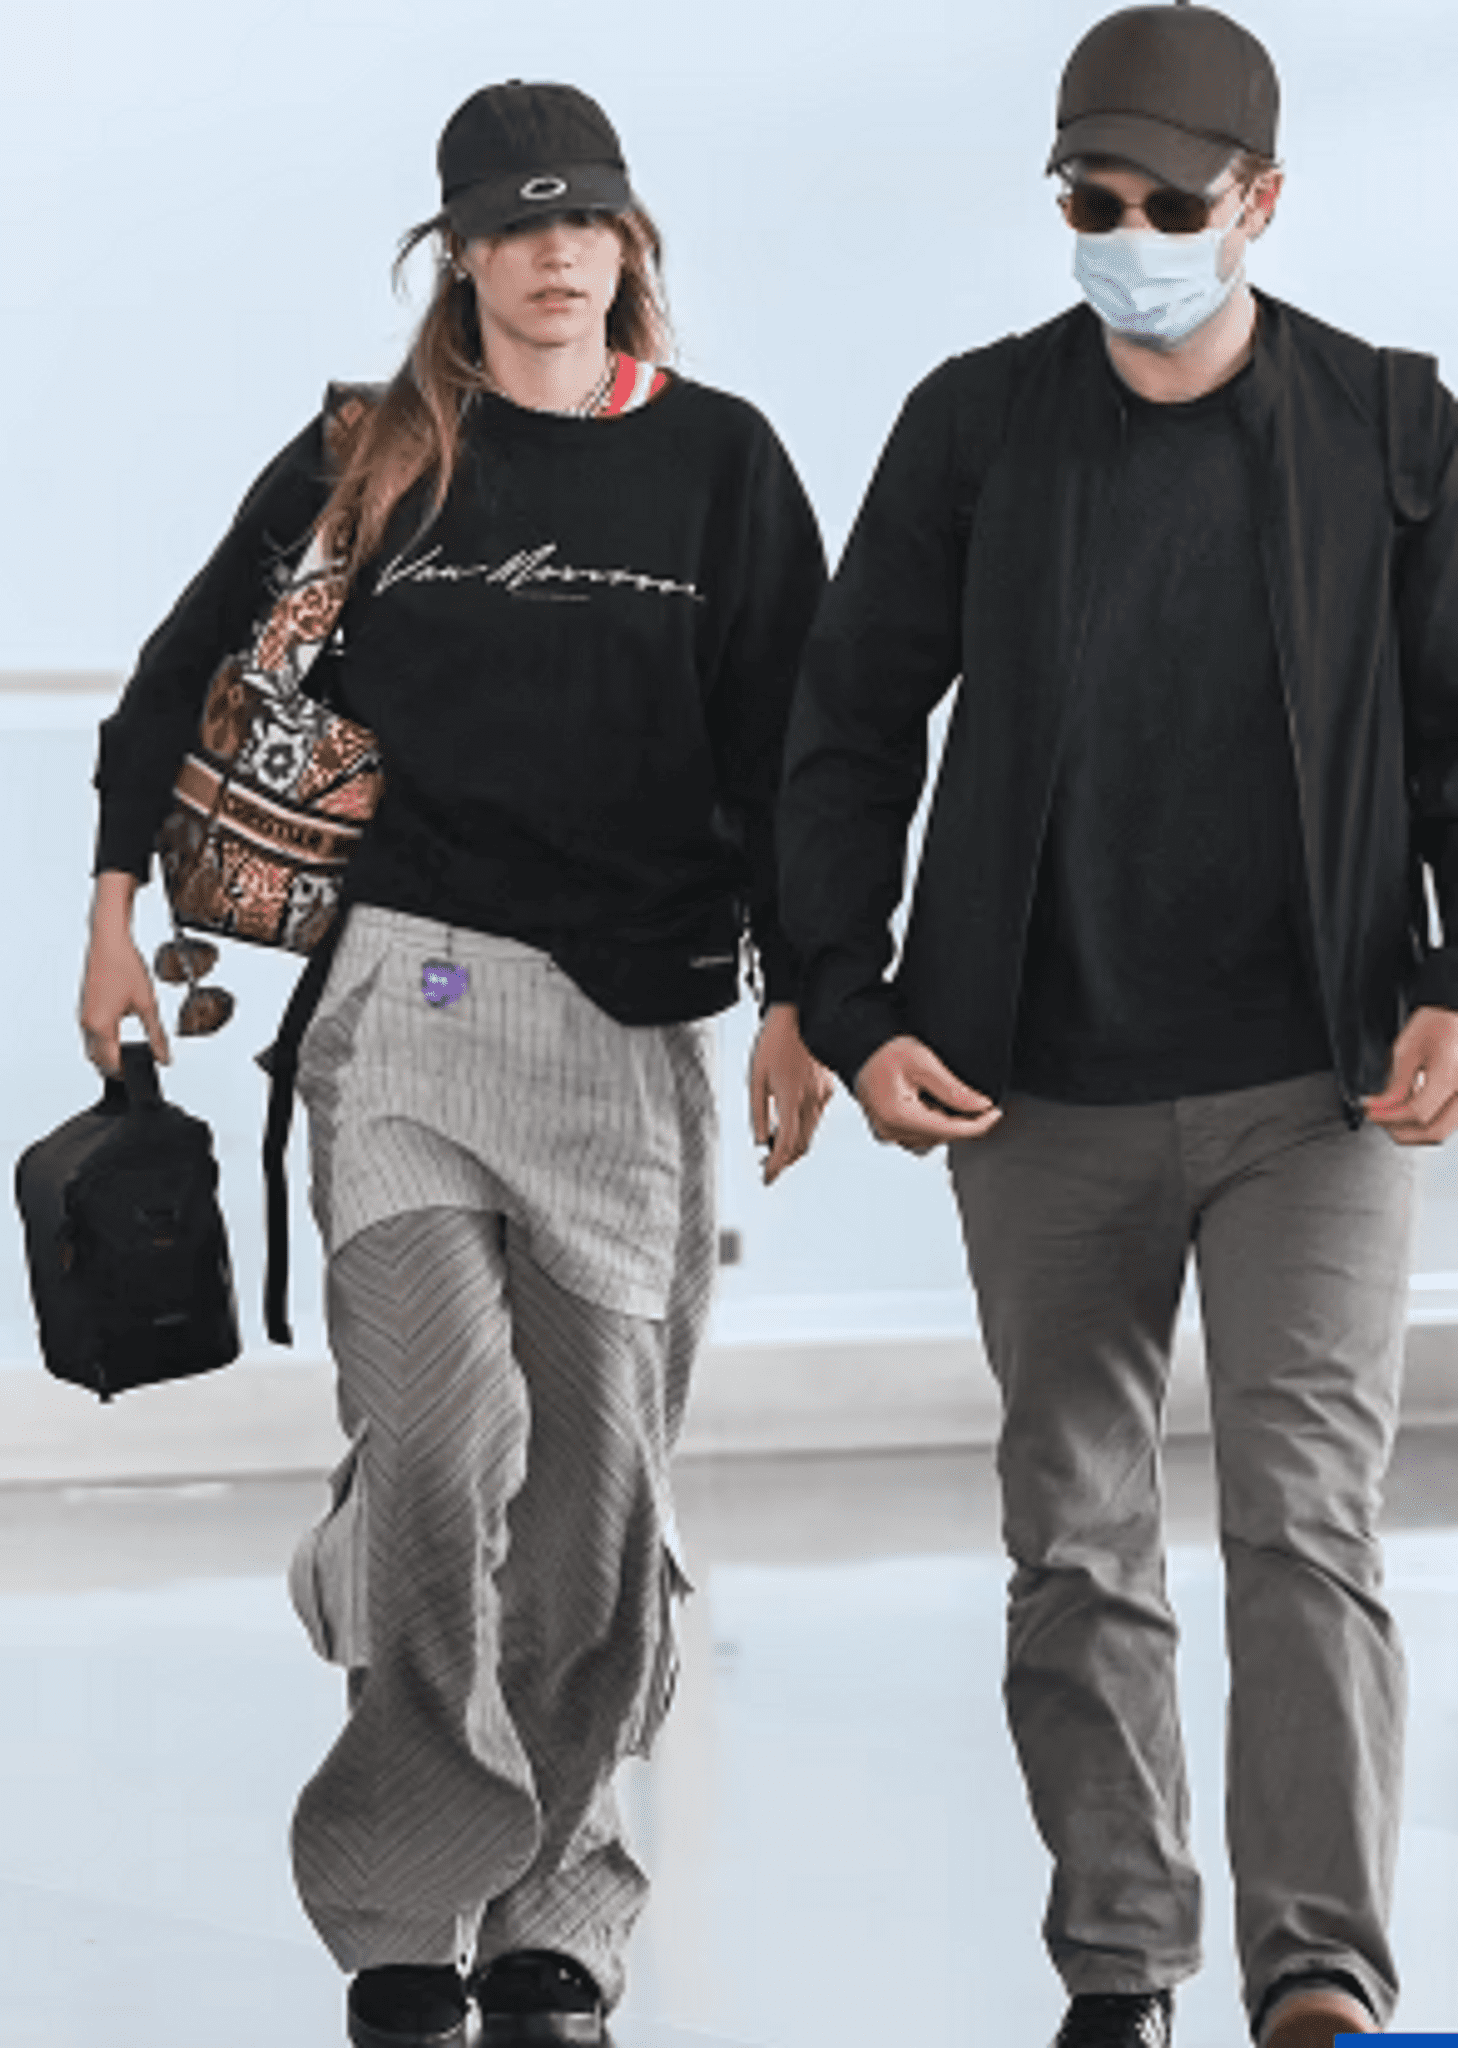 Putting Together Cozy Clothing For Flights Was Made Easy By Robert Pattinson And Suki Waterhouse